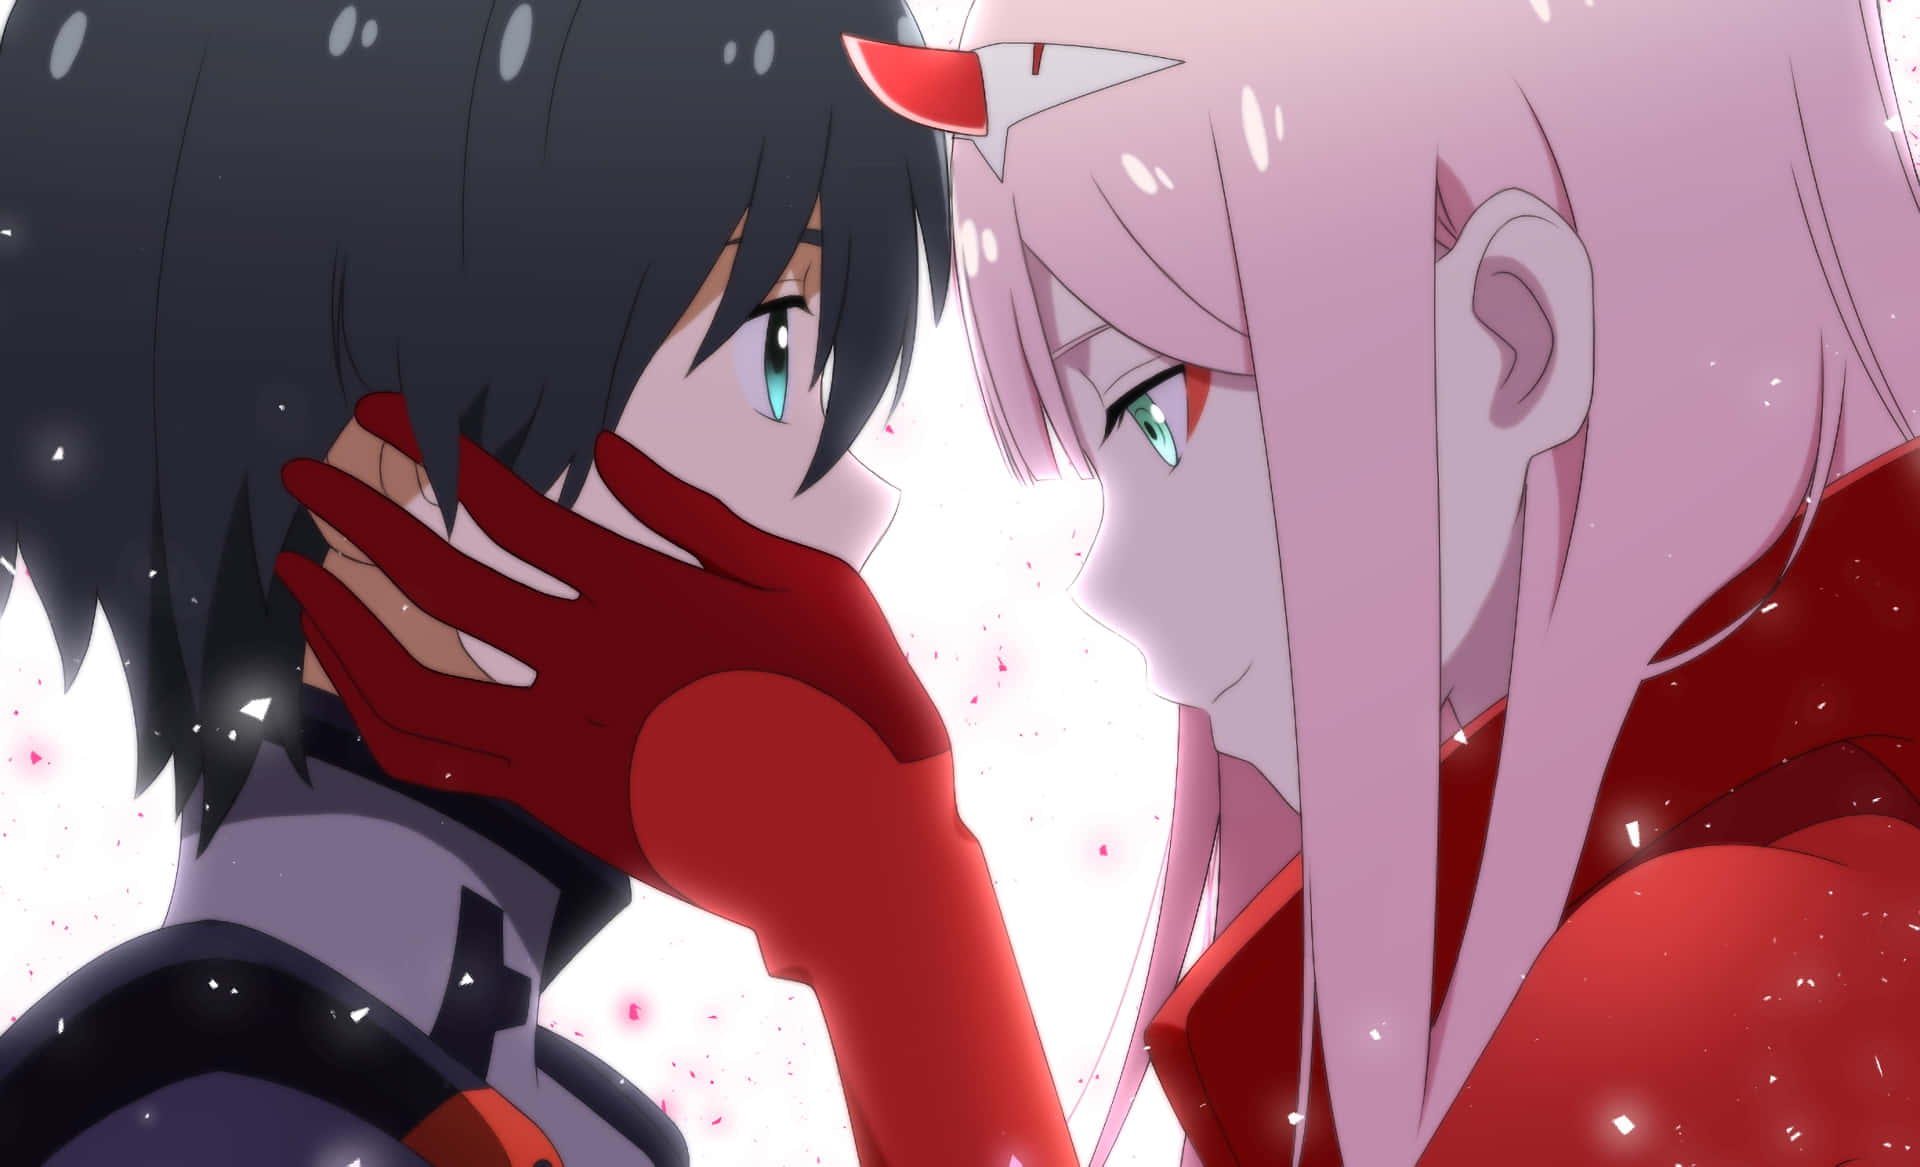 Hiro, Zero Two and the rest of the squad stand to protect humanity.